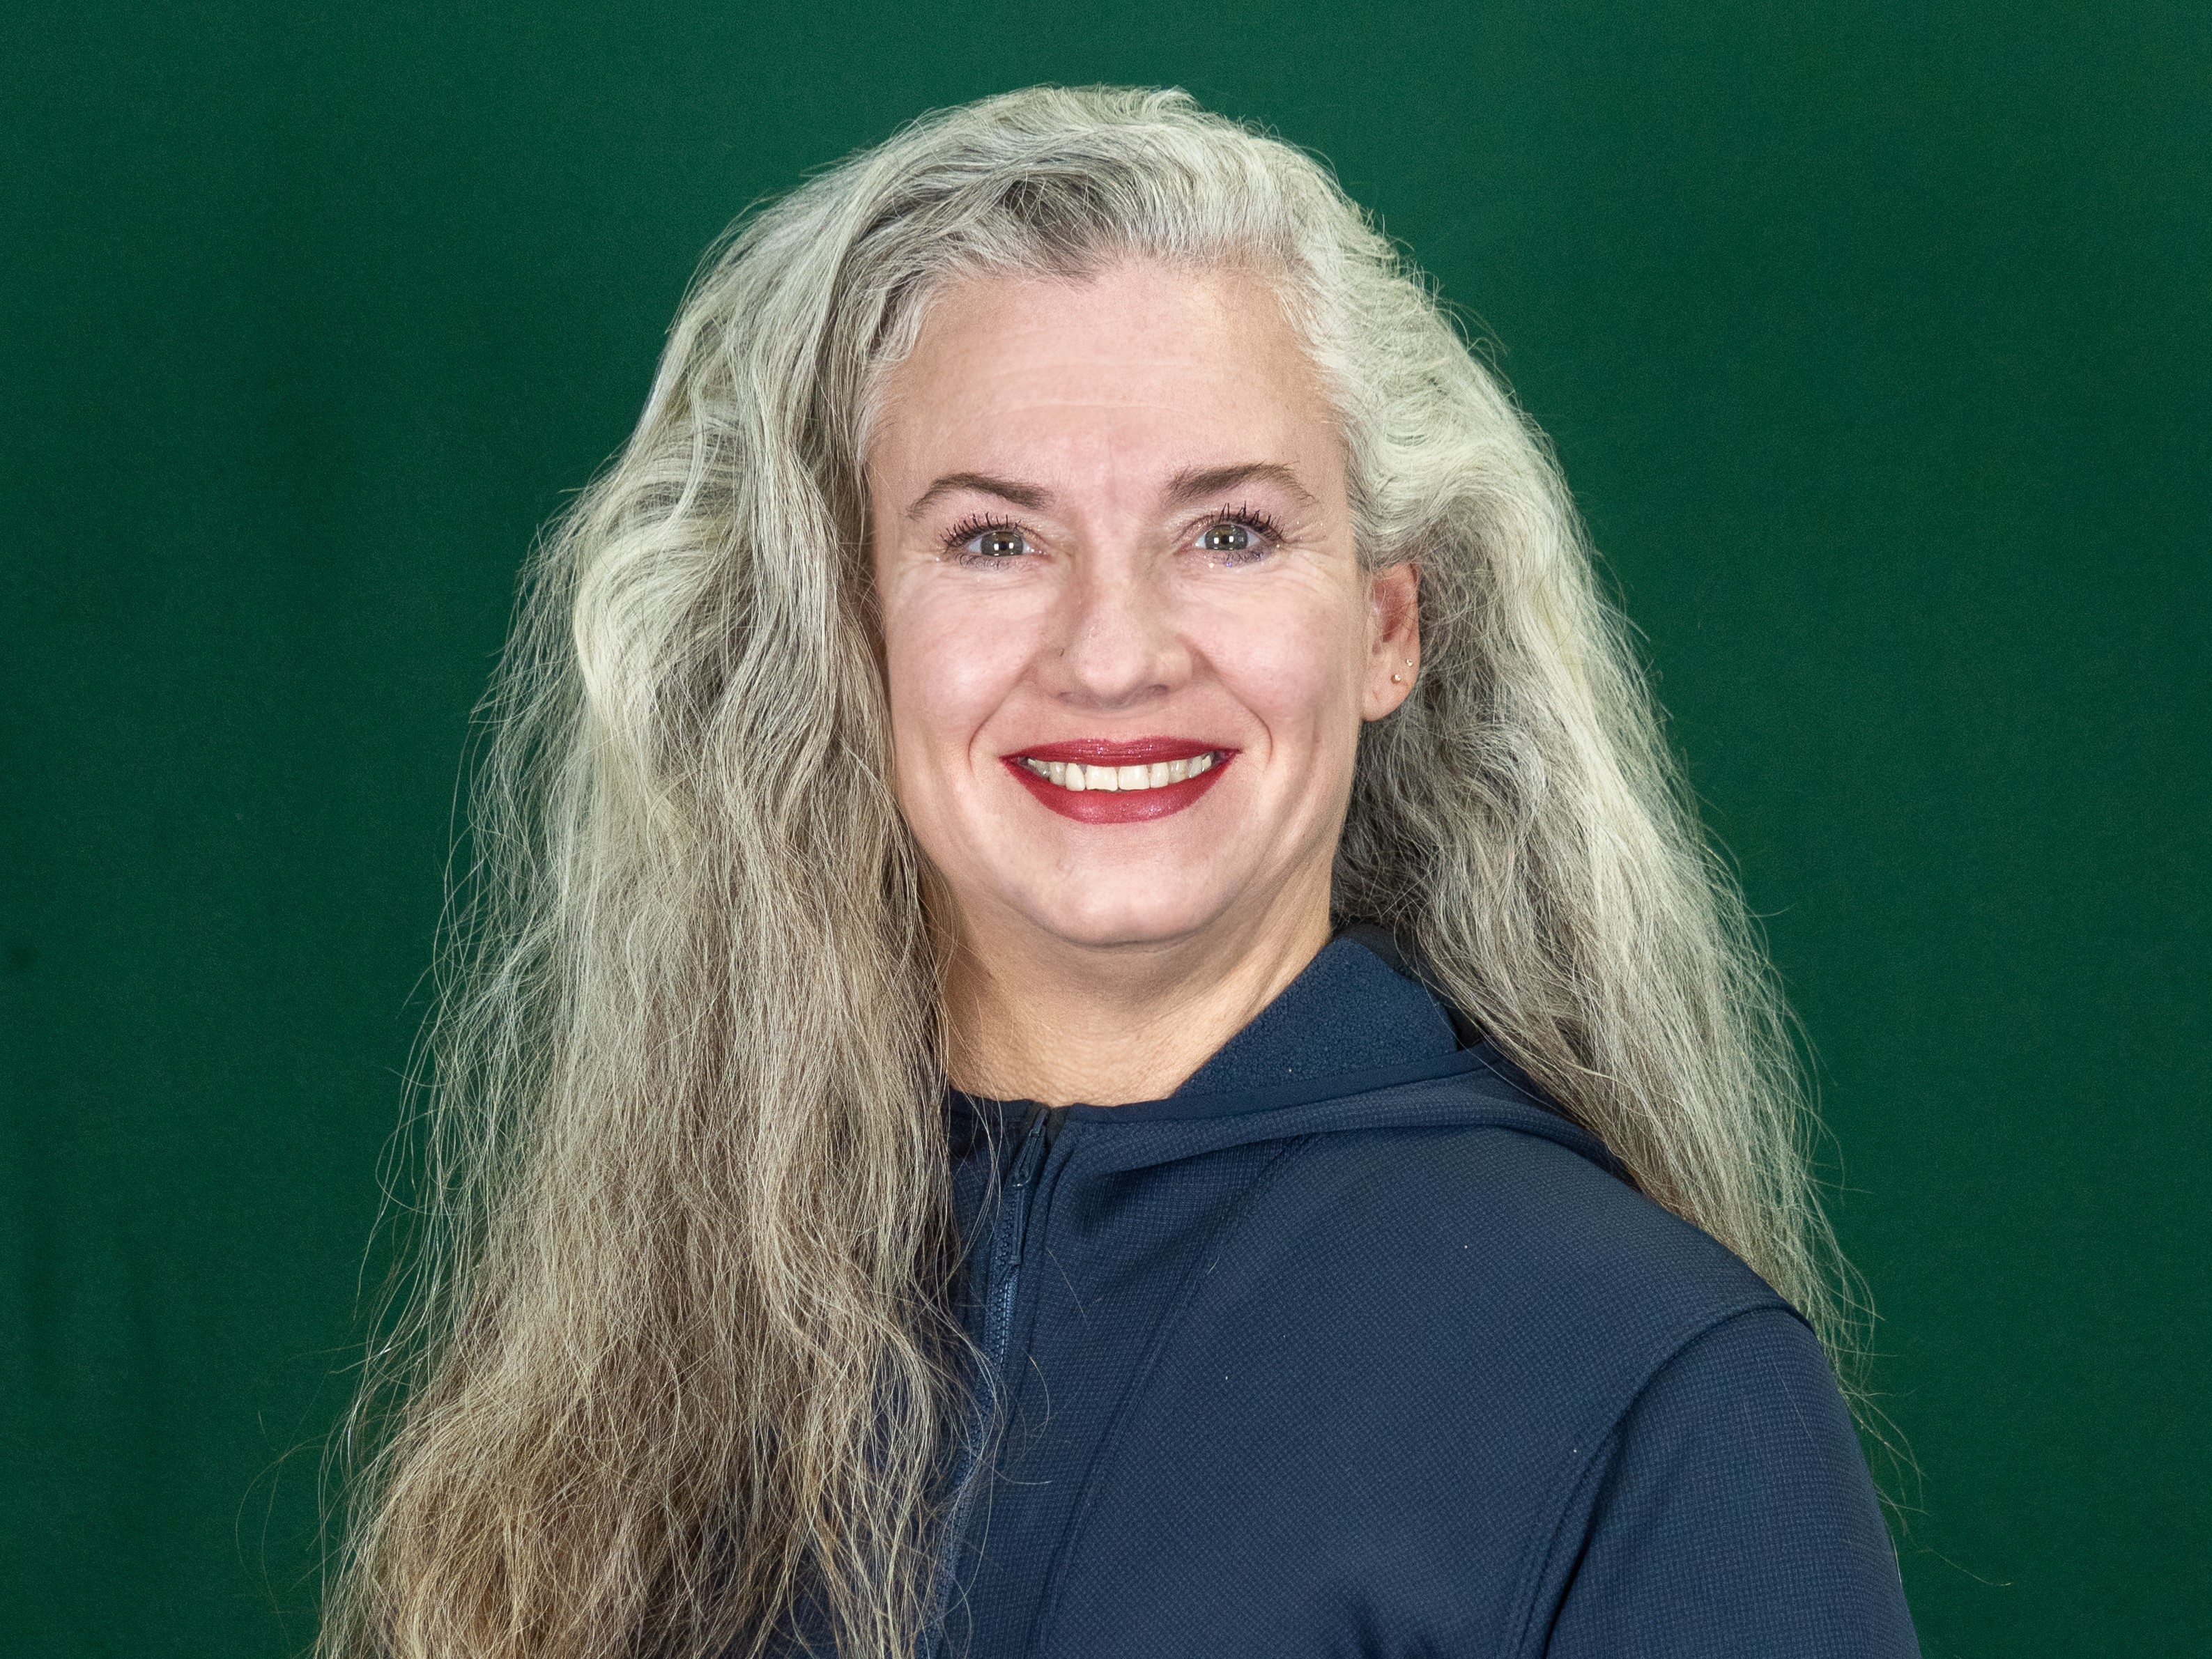 Woman in black top with a green background